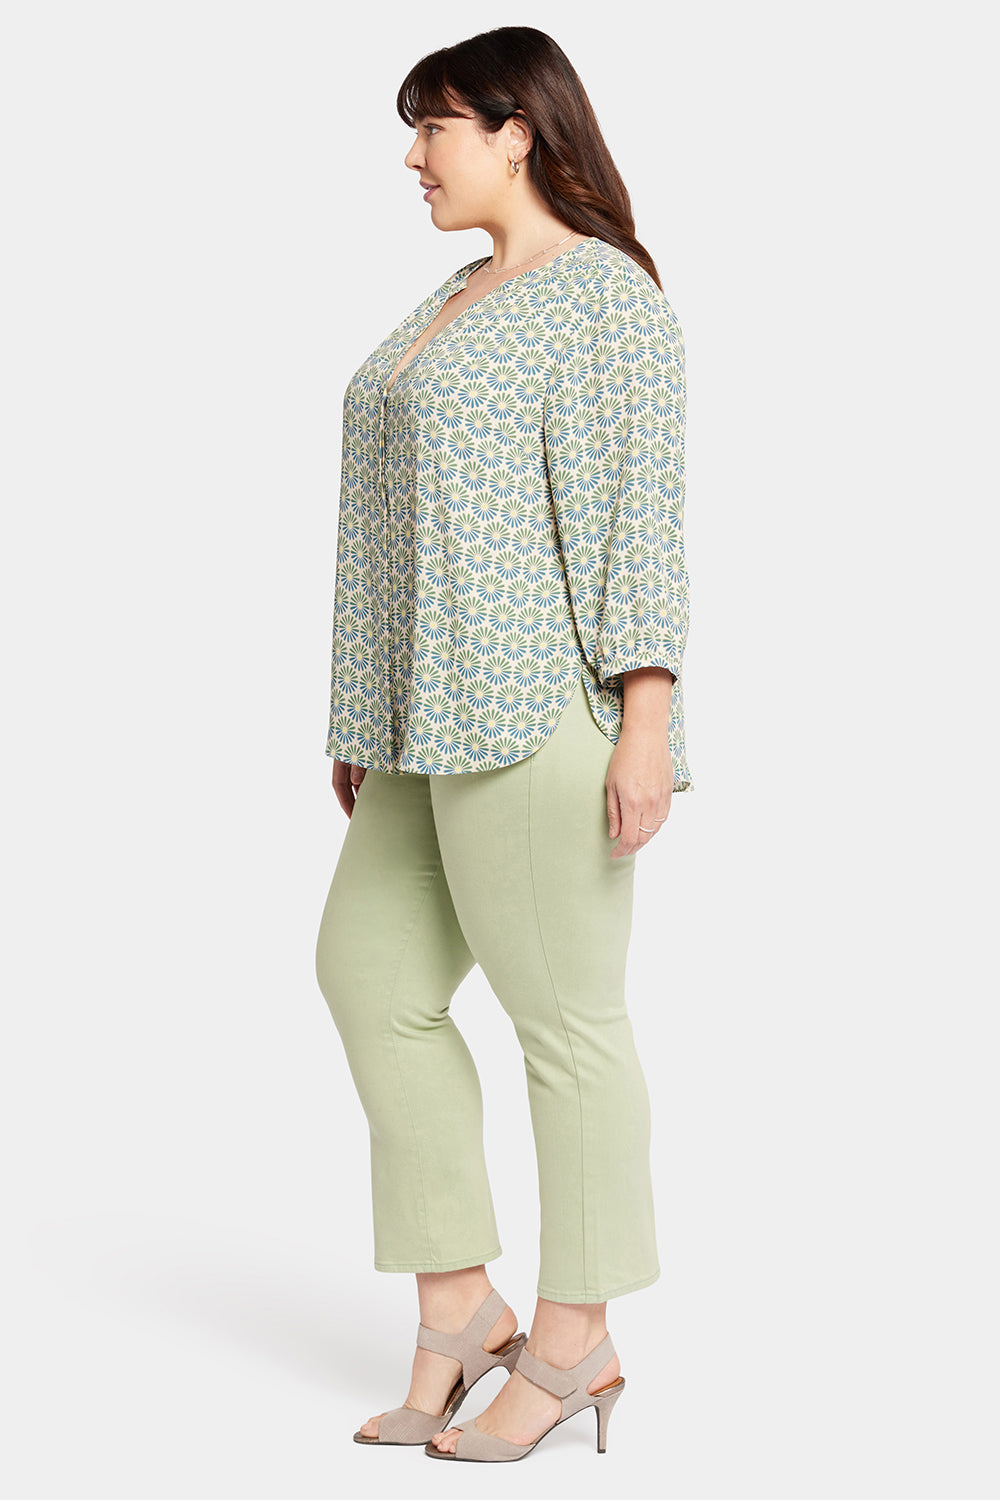 JM Collection Embroidered Pintucked Plus Size Shirt. MSRP $90